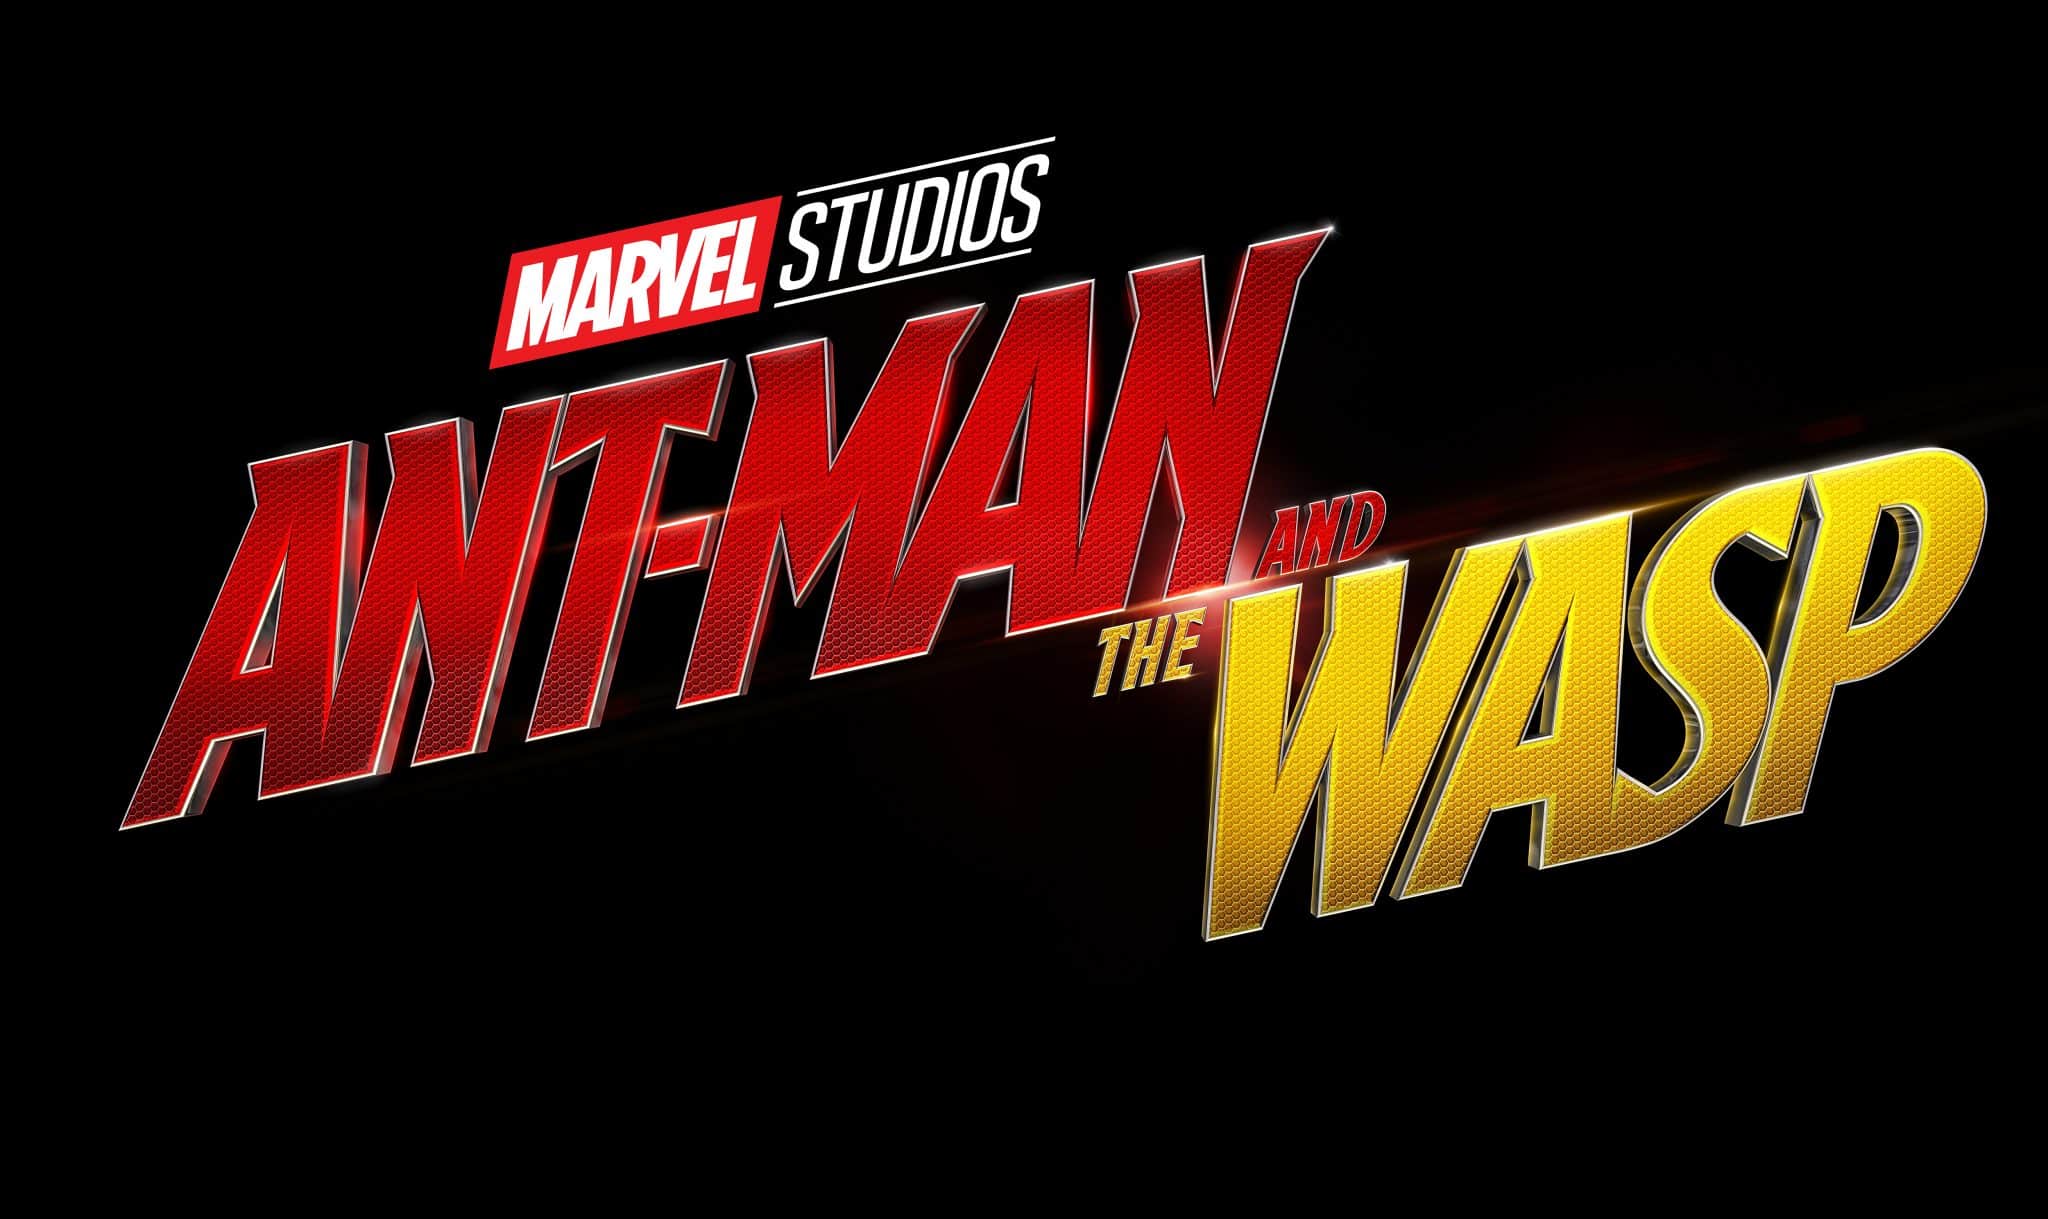 Marvel Studios' Ant-Man And The Wasp In Production! #AntManAndTheWasp